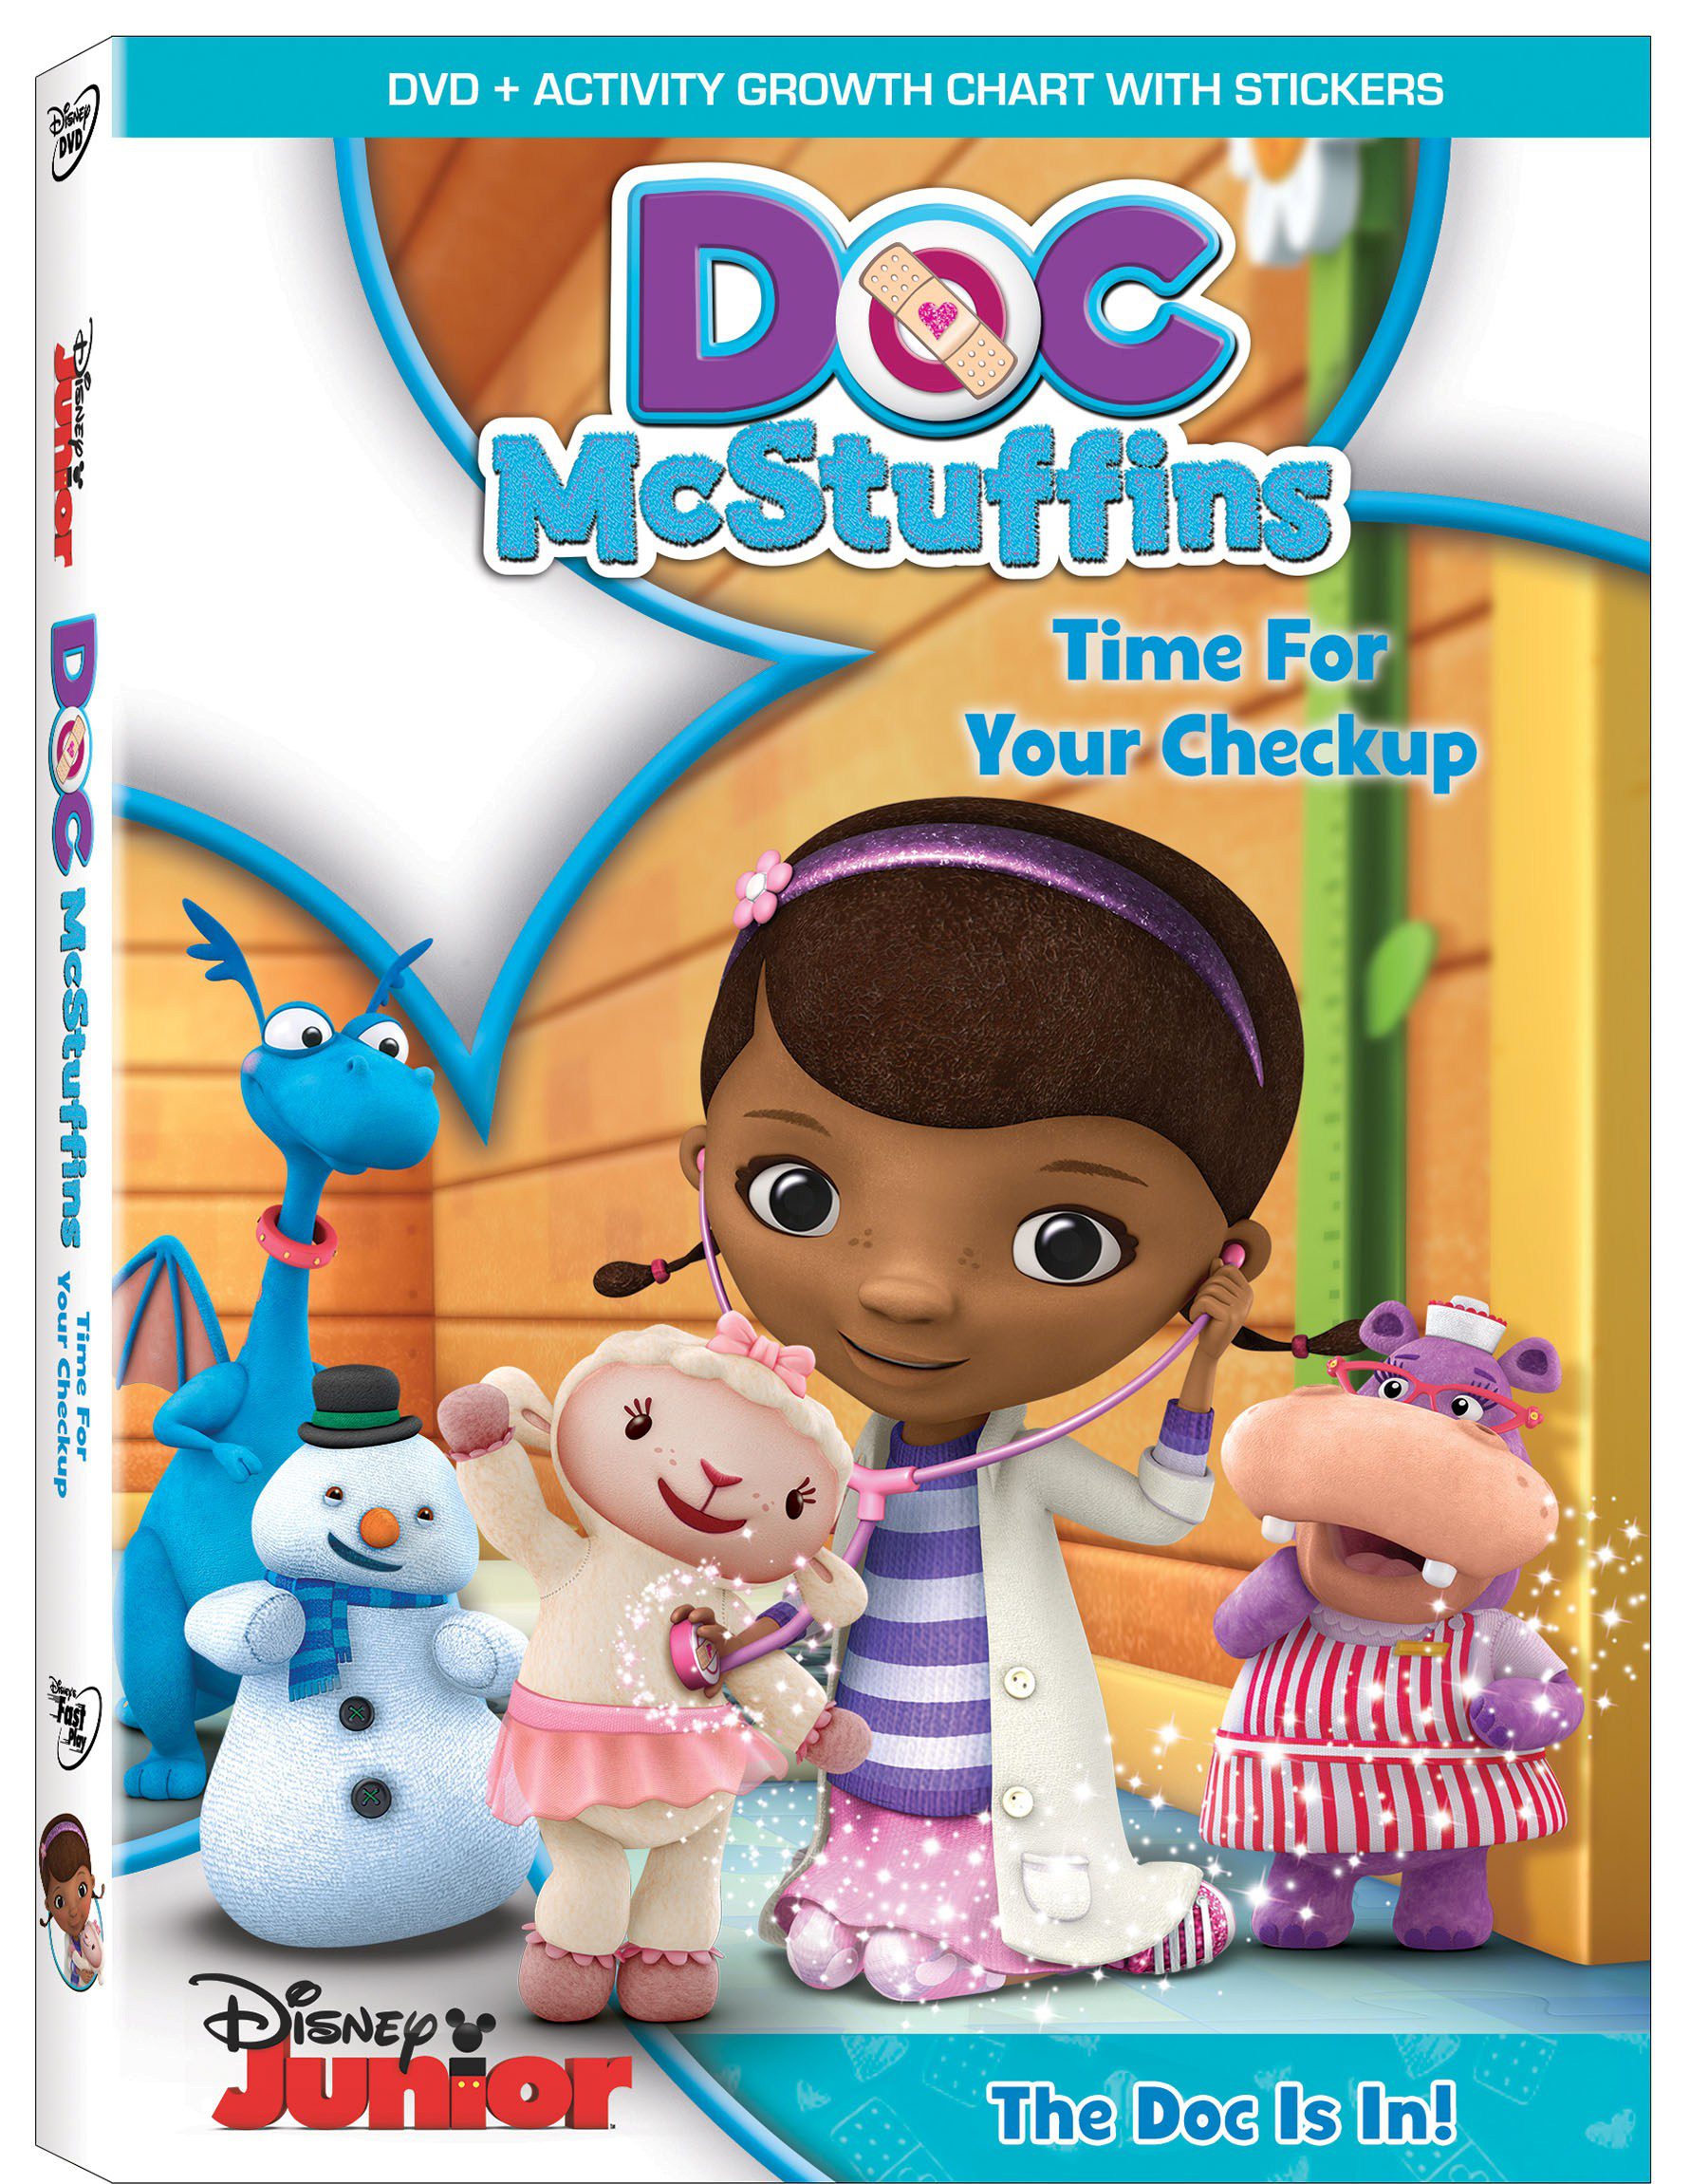 Doc McStuffins: Time For Your Check Up on DVD May 7, 2013